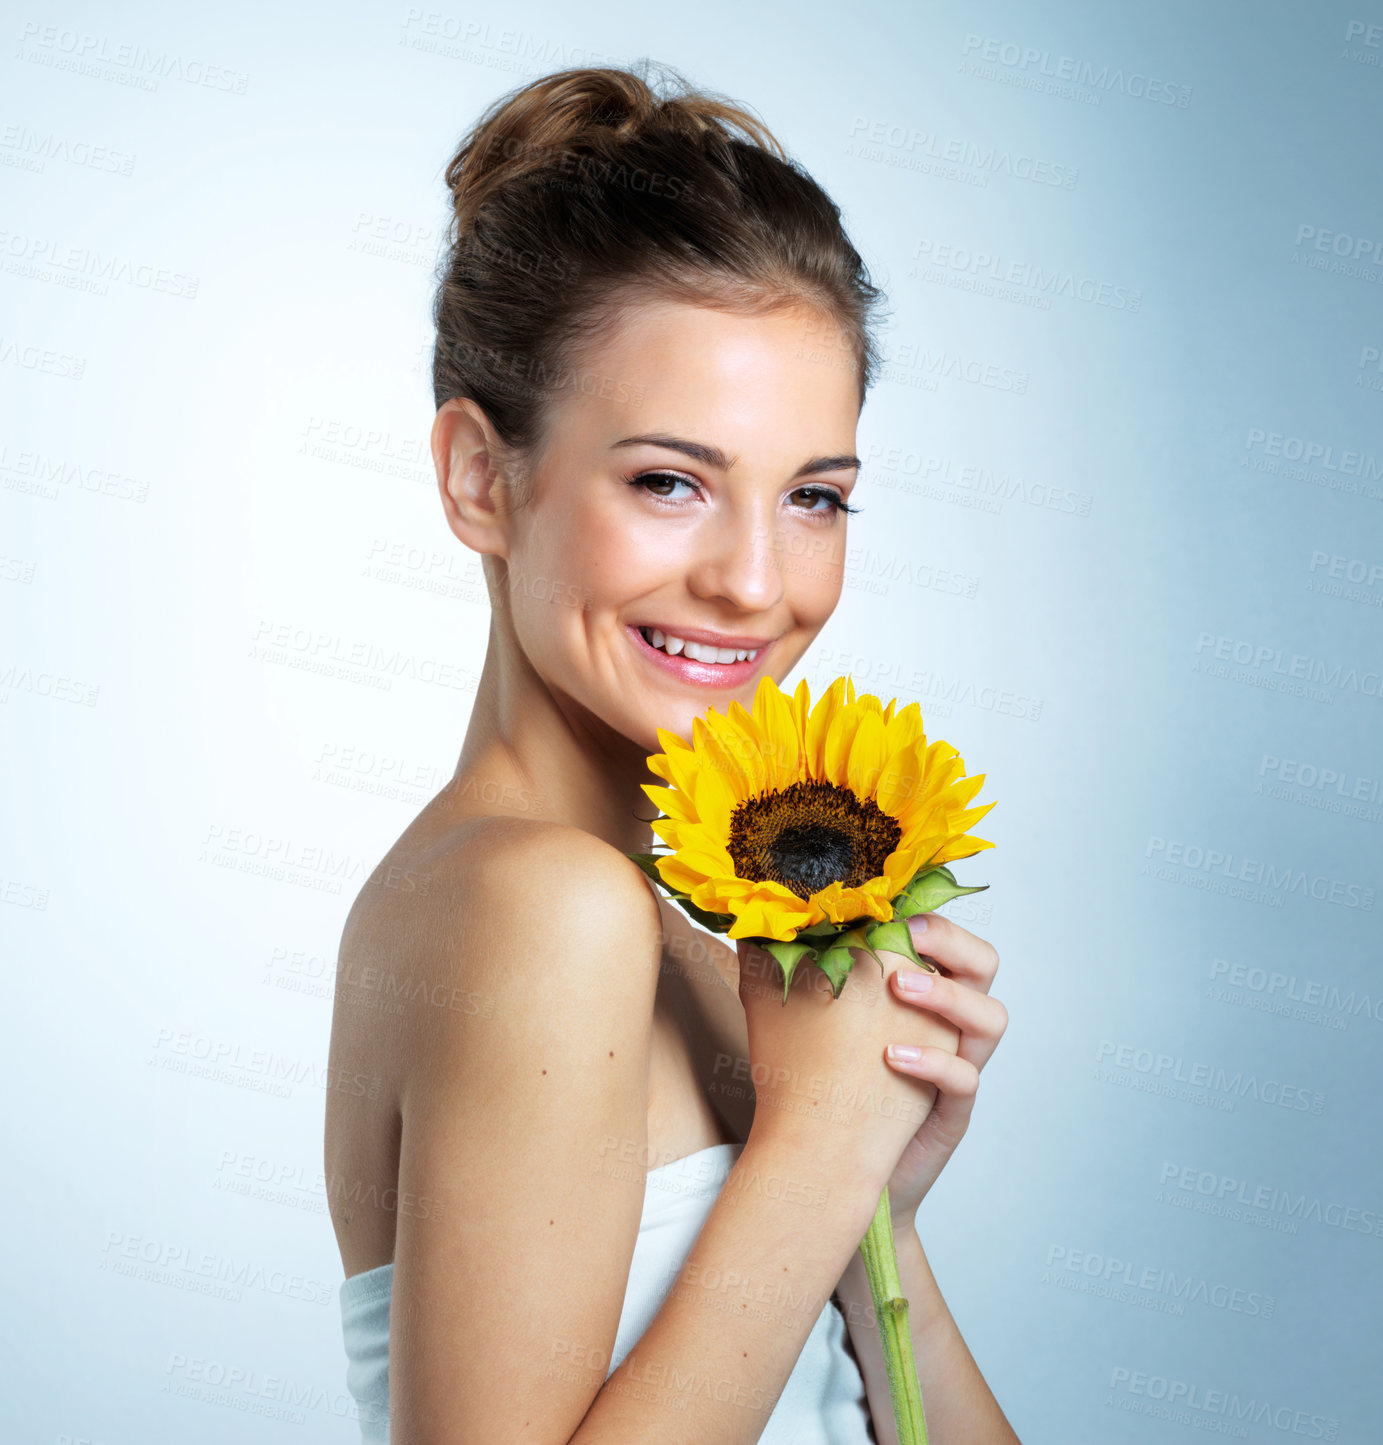 Buy stock photo Studio portrait of a beautiful young woman holding a sunflower